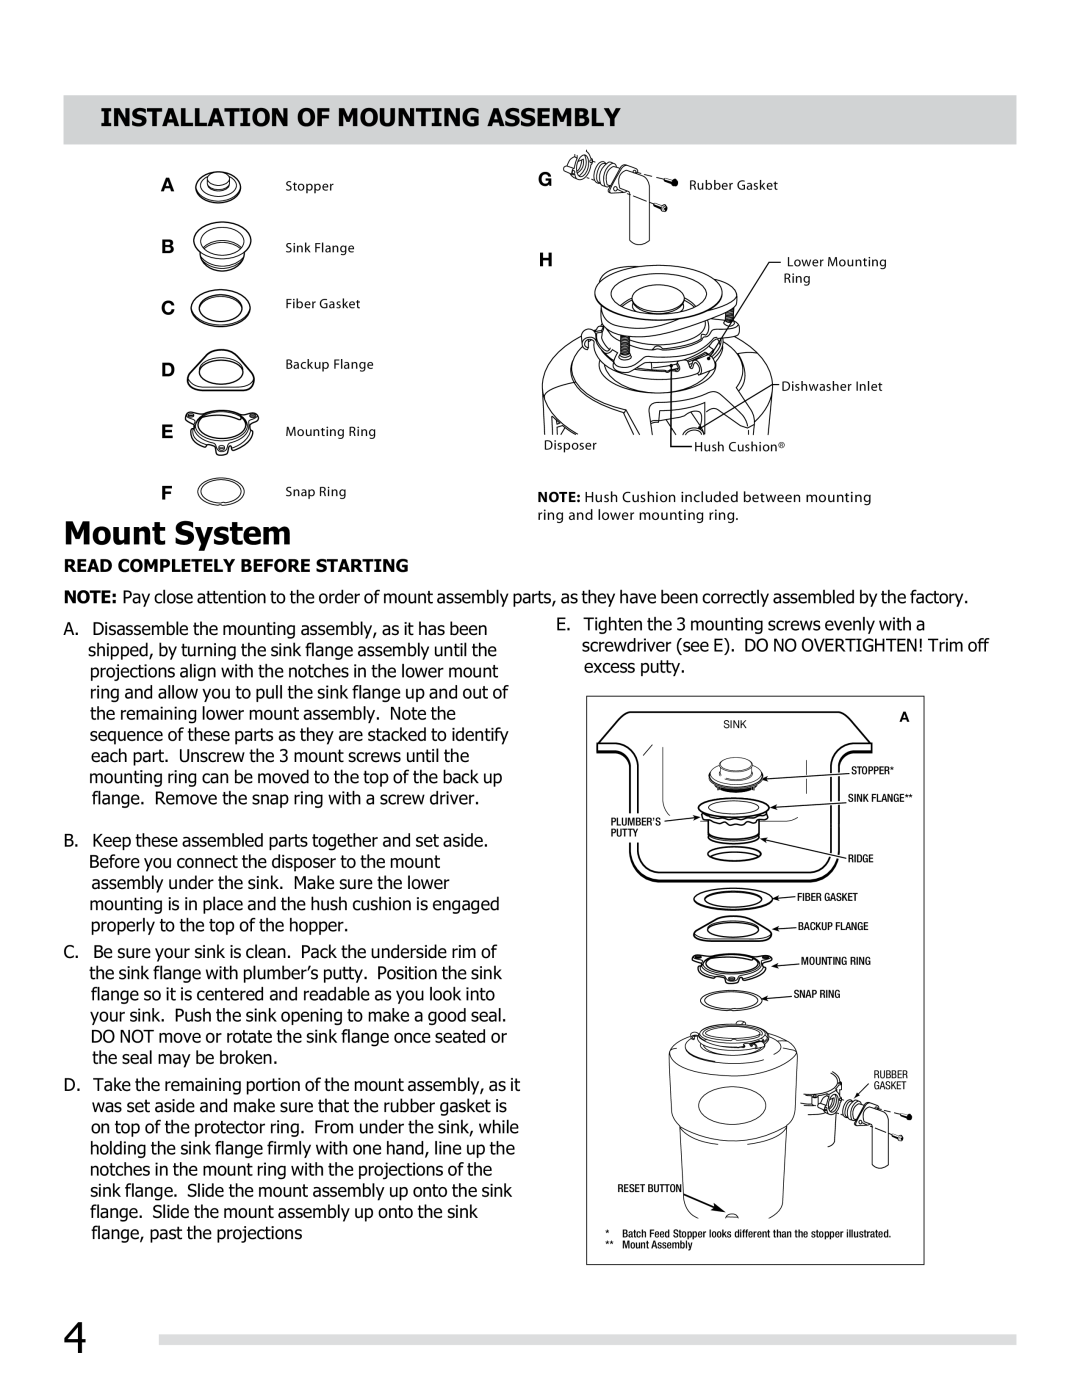 Frigidaire 560C525P02 manual Mount System, Installation Of Mounting Assembly 